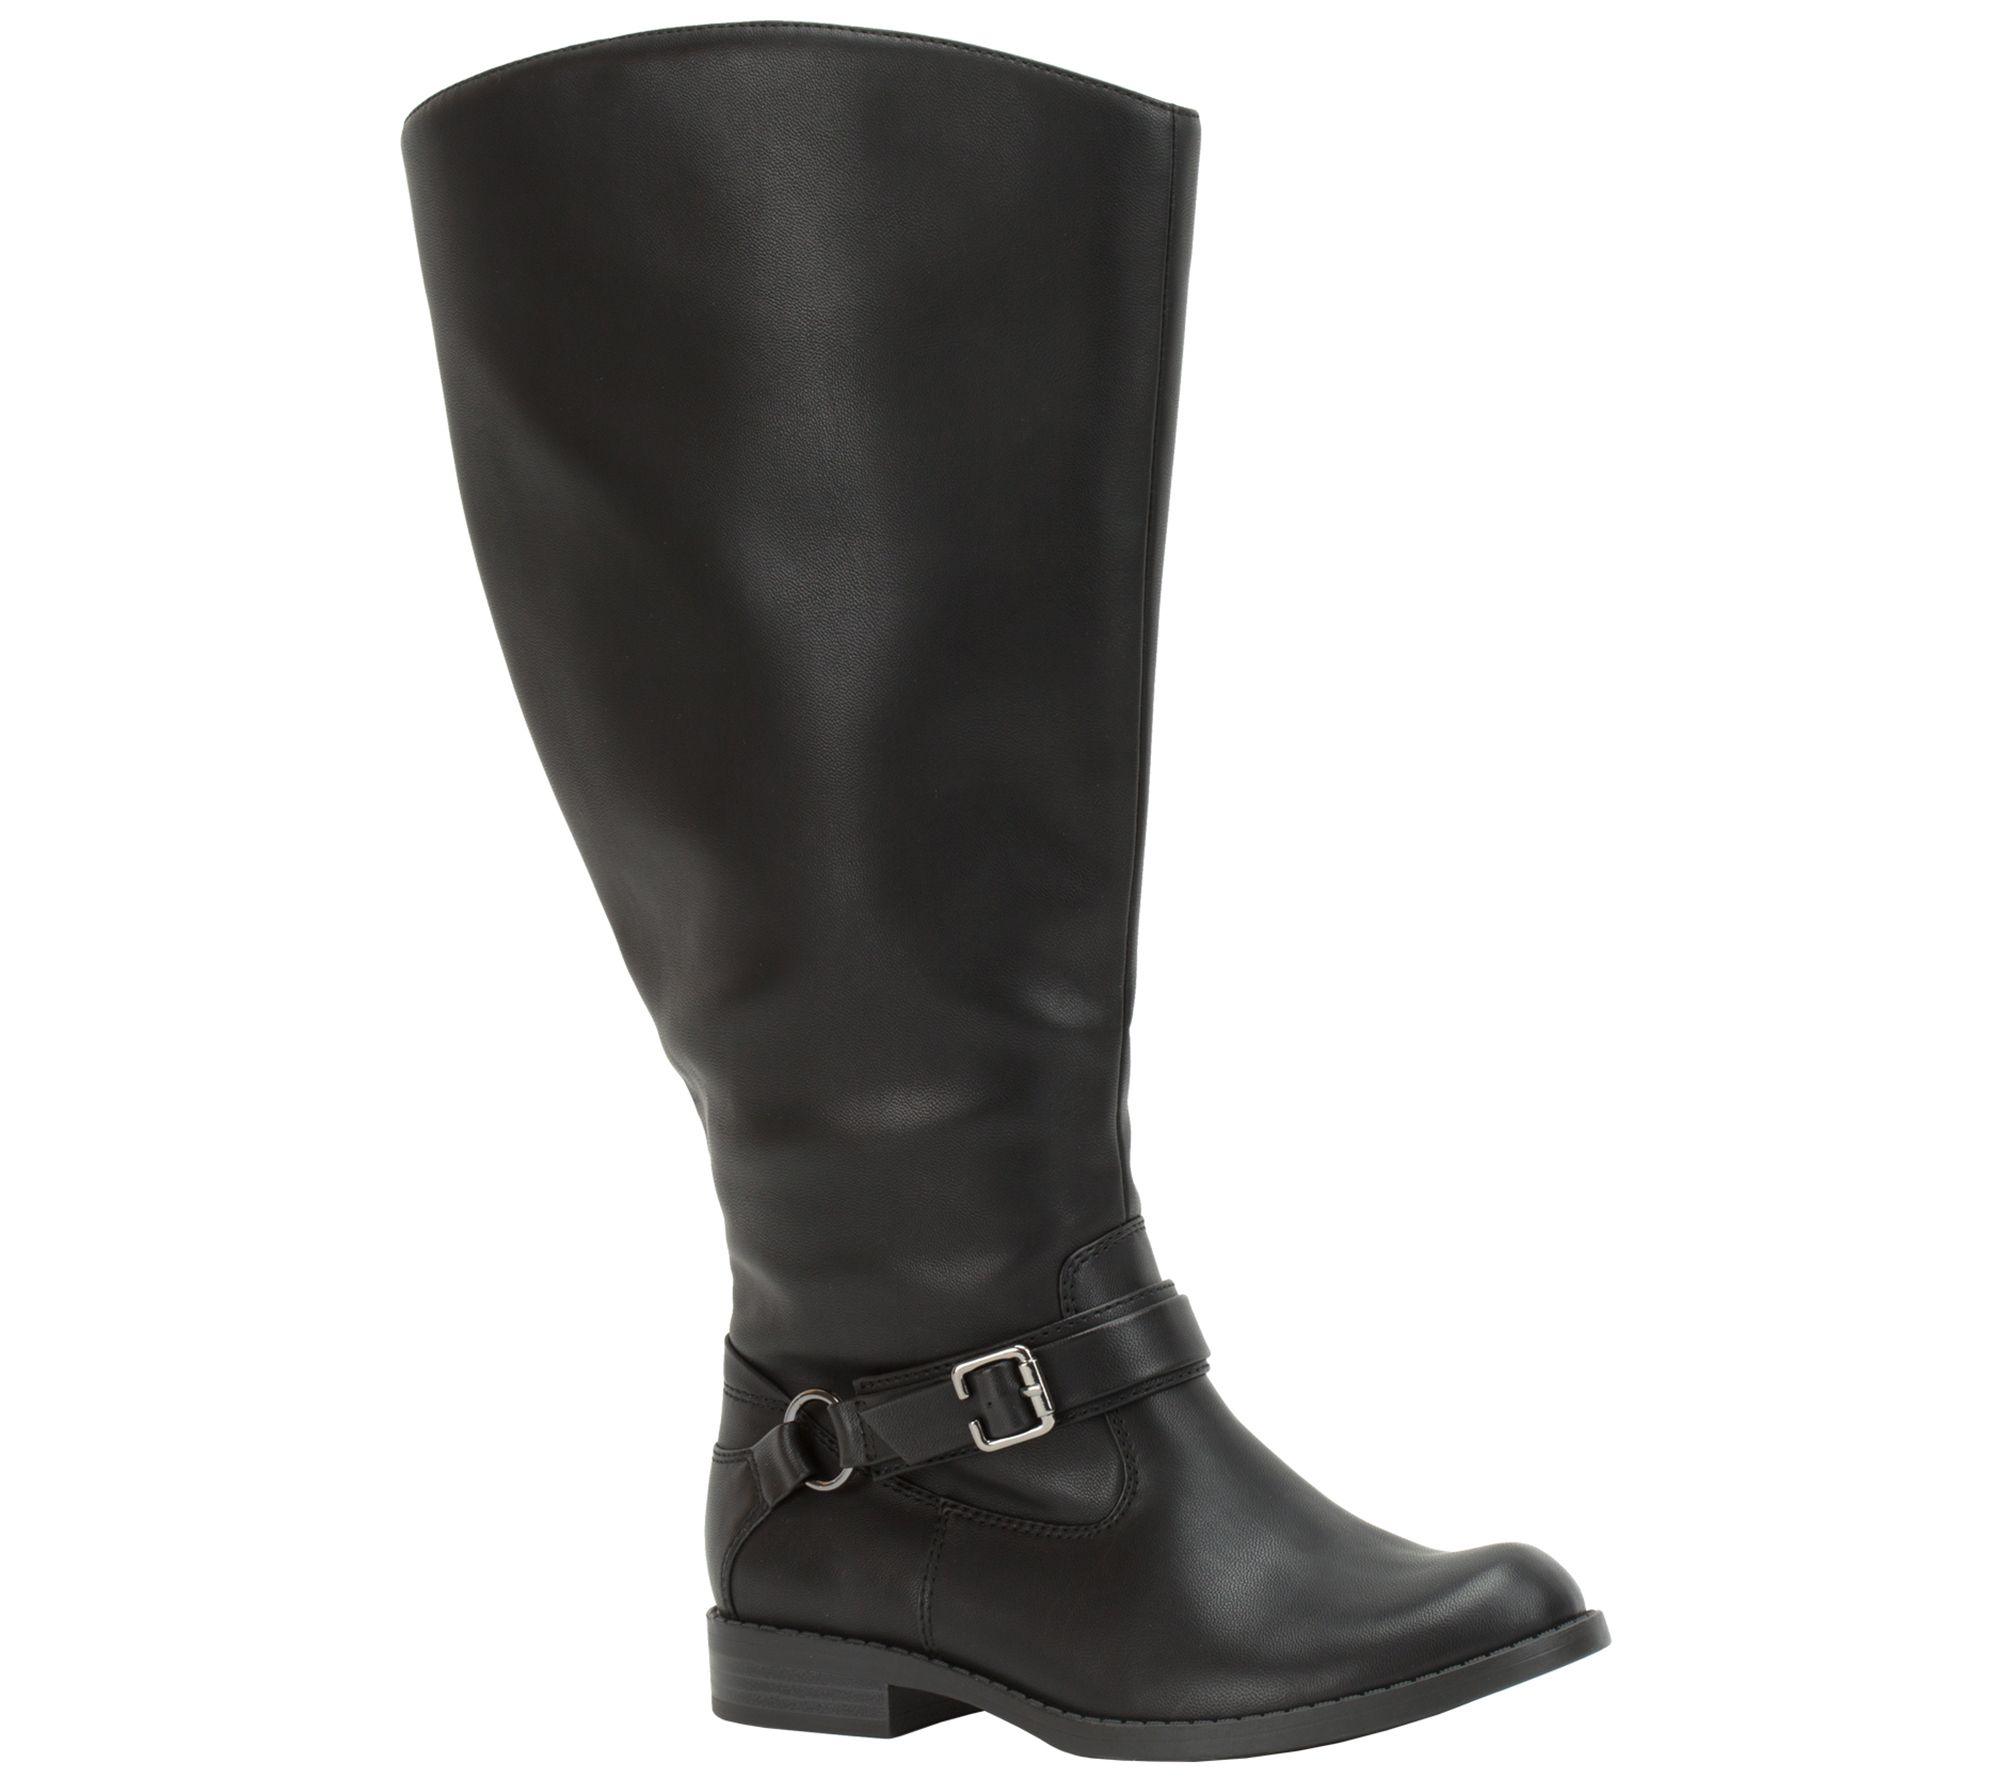 qvc boots wide width